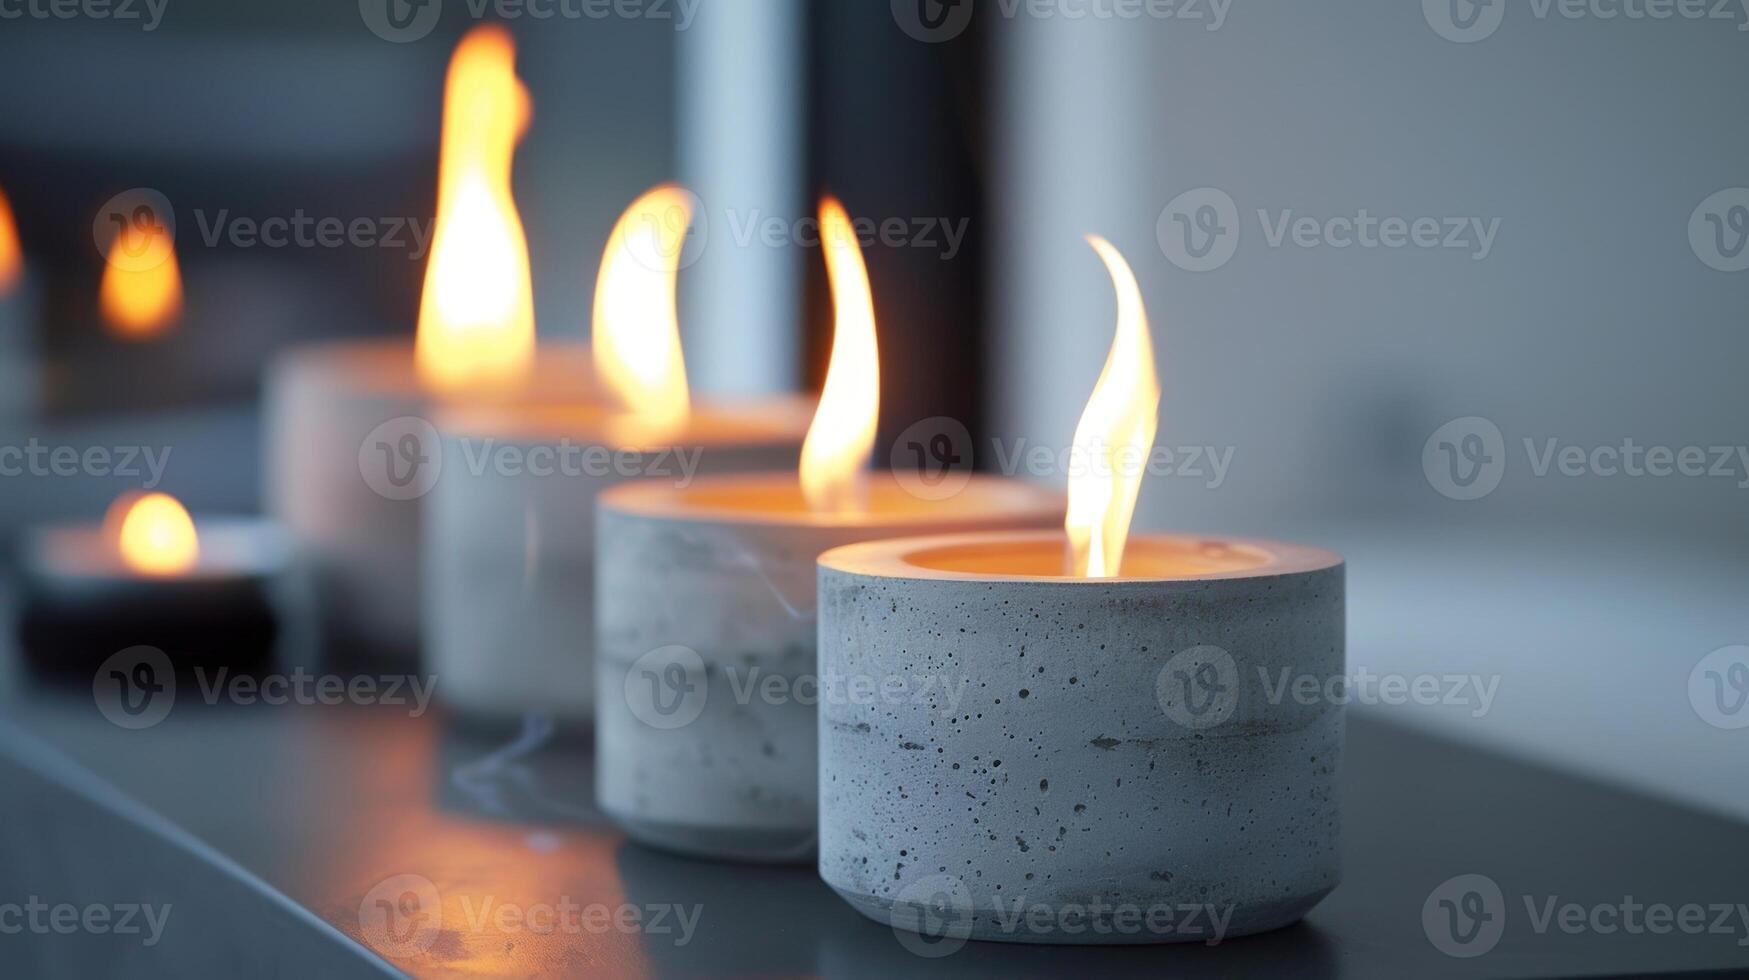 The flames dance delicately in the industrialchic concrete holders creating a mesmerizing display of light and shadow. 2d flat cartoon photo